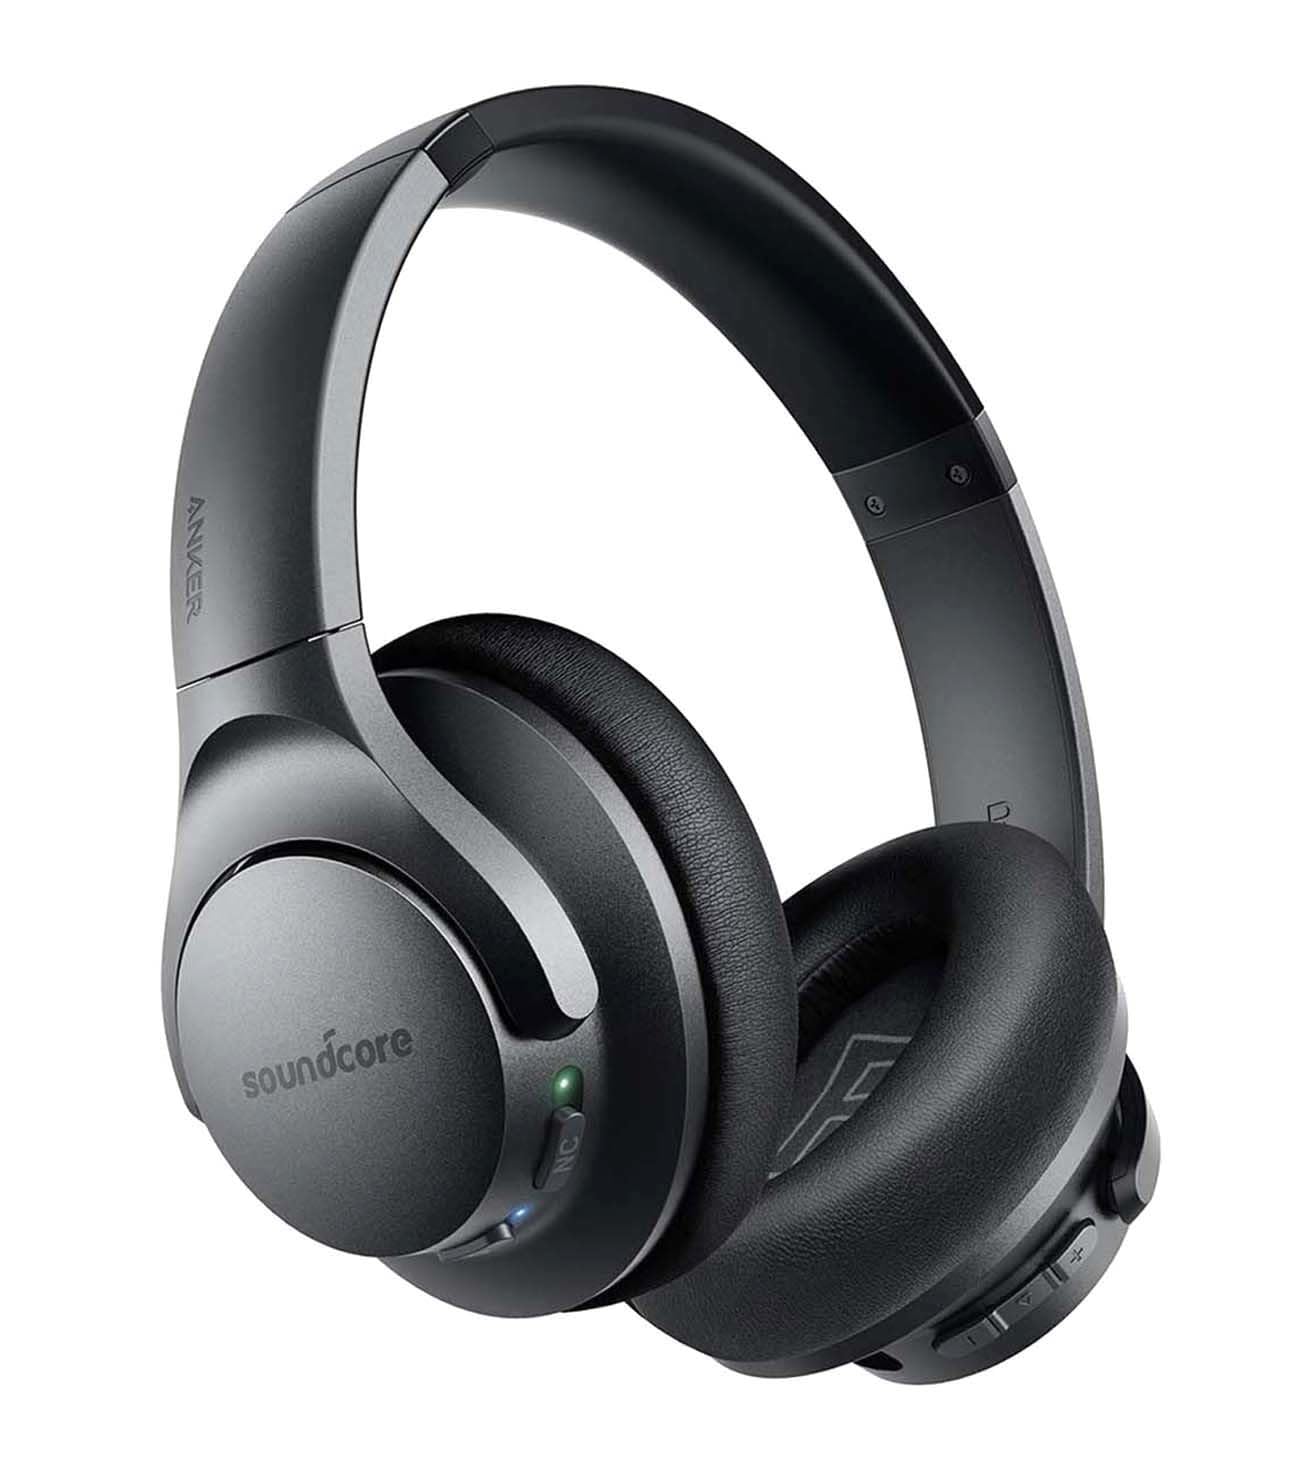 Soundcore Anker Life Q20 Hybrid Active Noise Cancelling Headphones, Wireless Over Ear Bluetooth Headphones, 60H Playtime, Hi-Res Audio, Deep Bass, Memory Foam Ear Cups $39.98